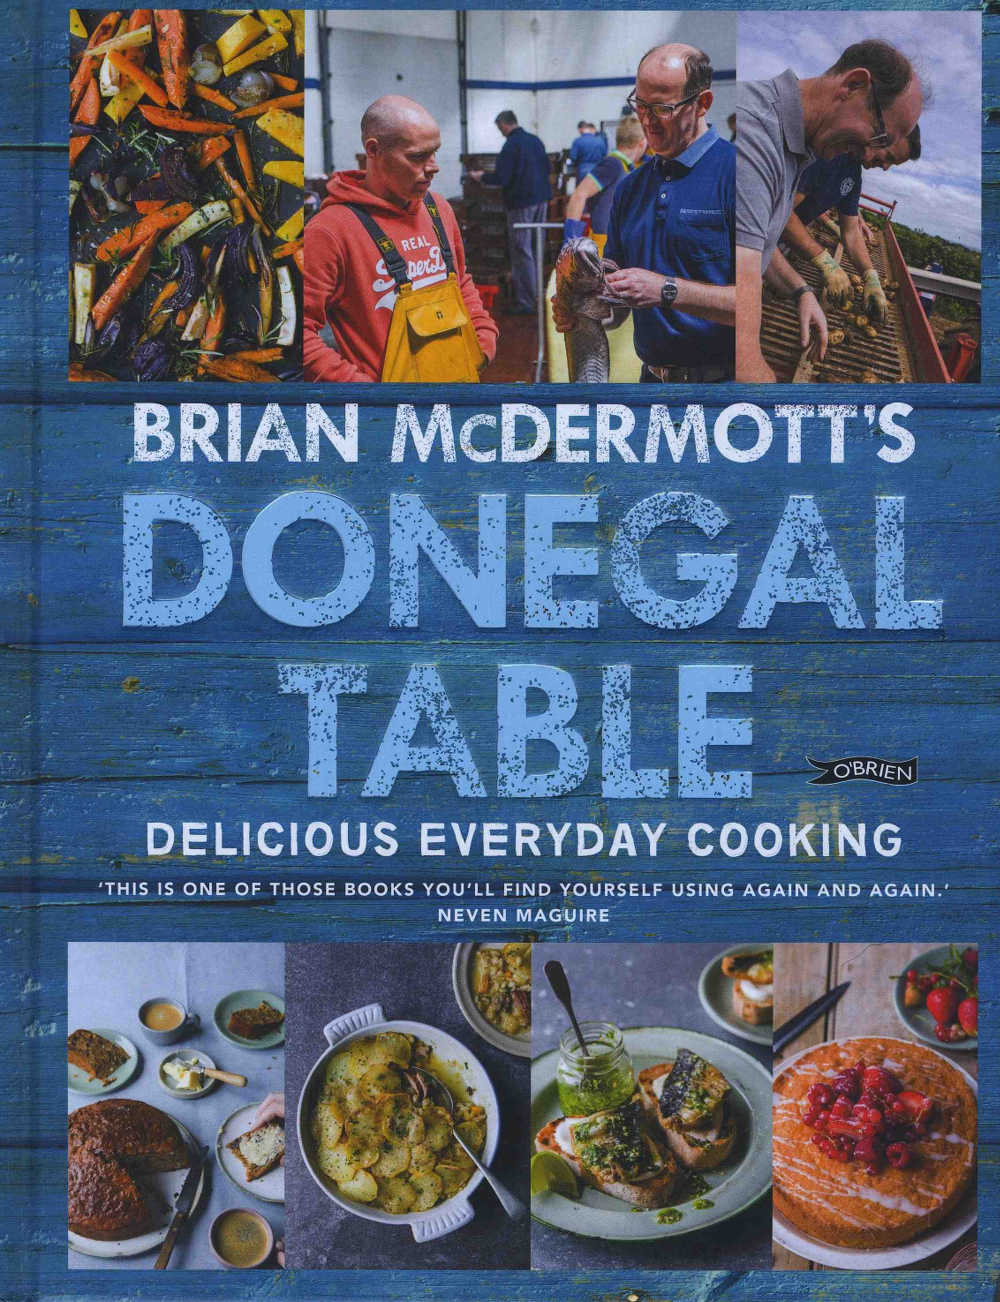 Brian McDermott's Donegal Table Delicious Everyday Cooking (O’BrienPress, hardback, €19.99 /£17.99)